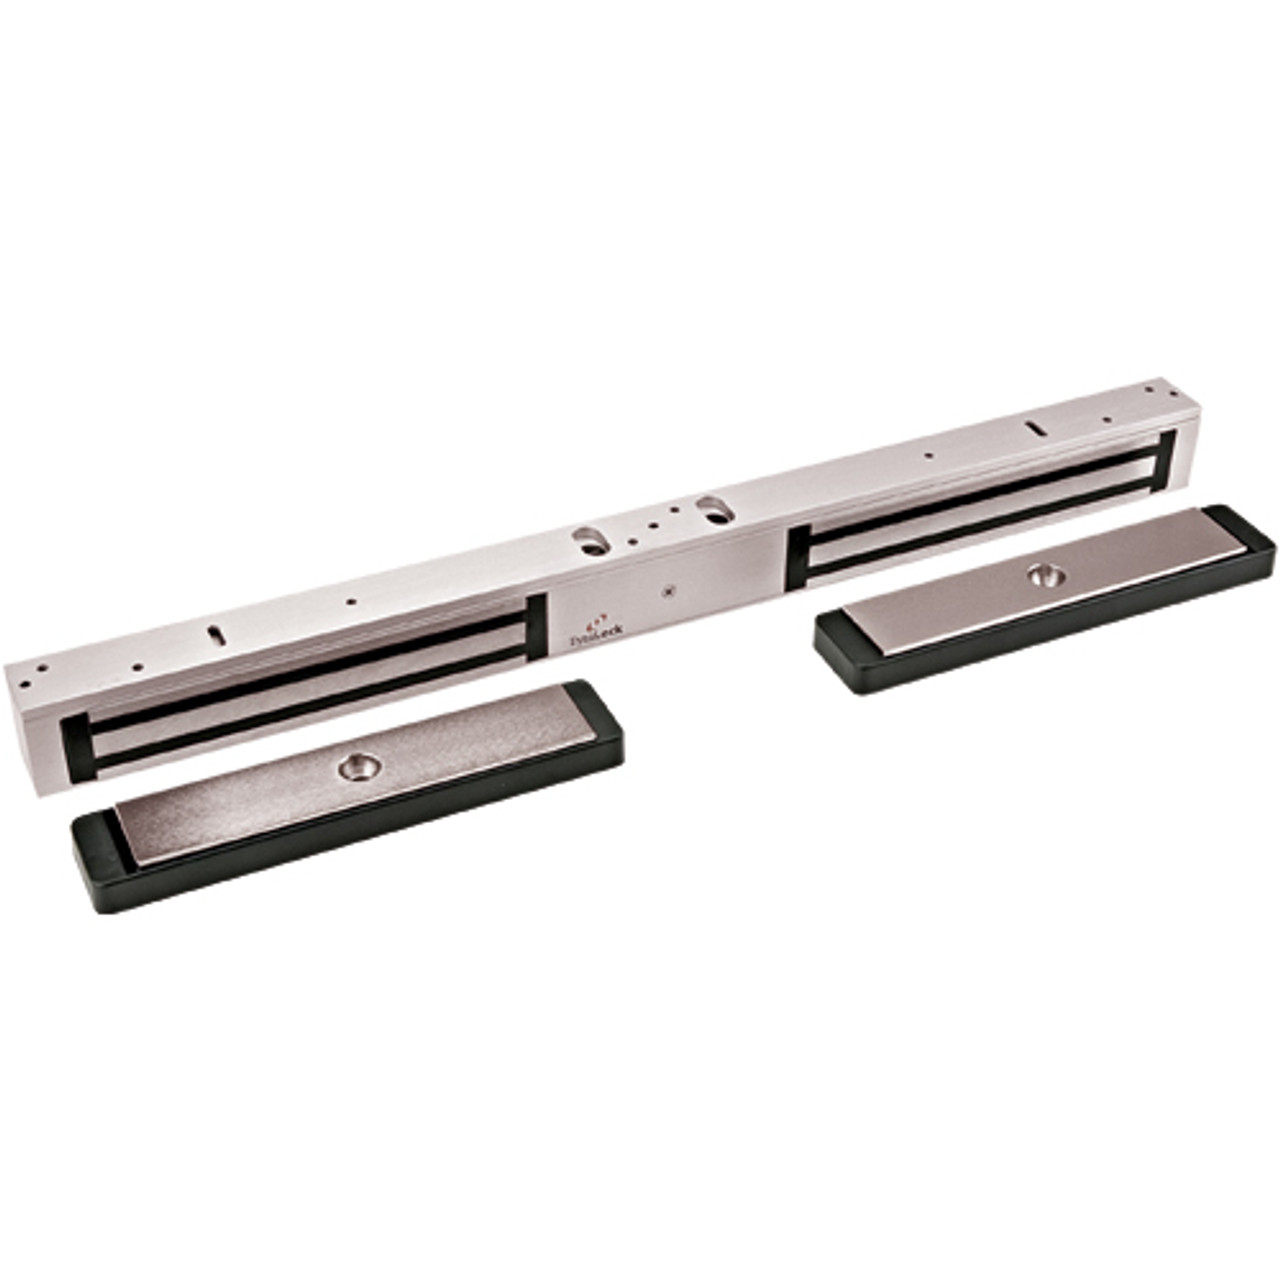 2282-US28-HSM2 DynaLock 2280 Series Double SlimLine Electromagnetic Lock for Outswing Door With HSM in Satin Aluminum